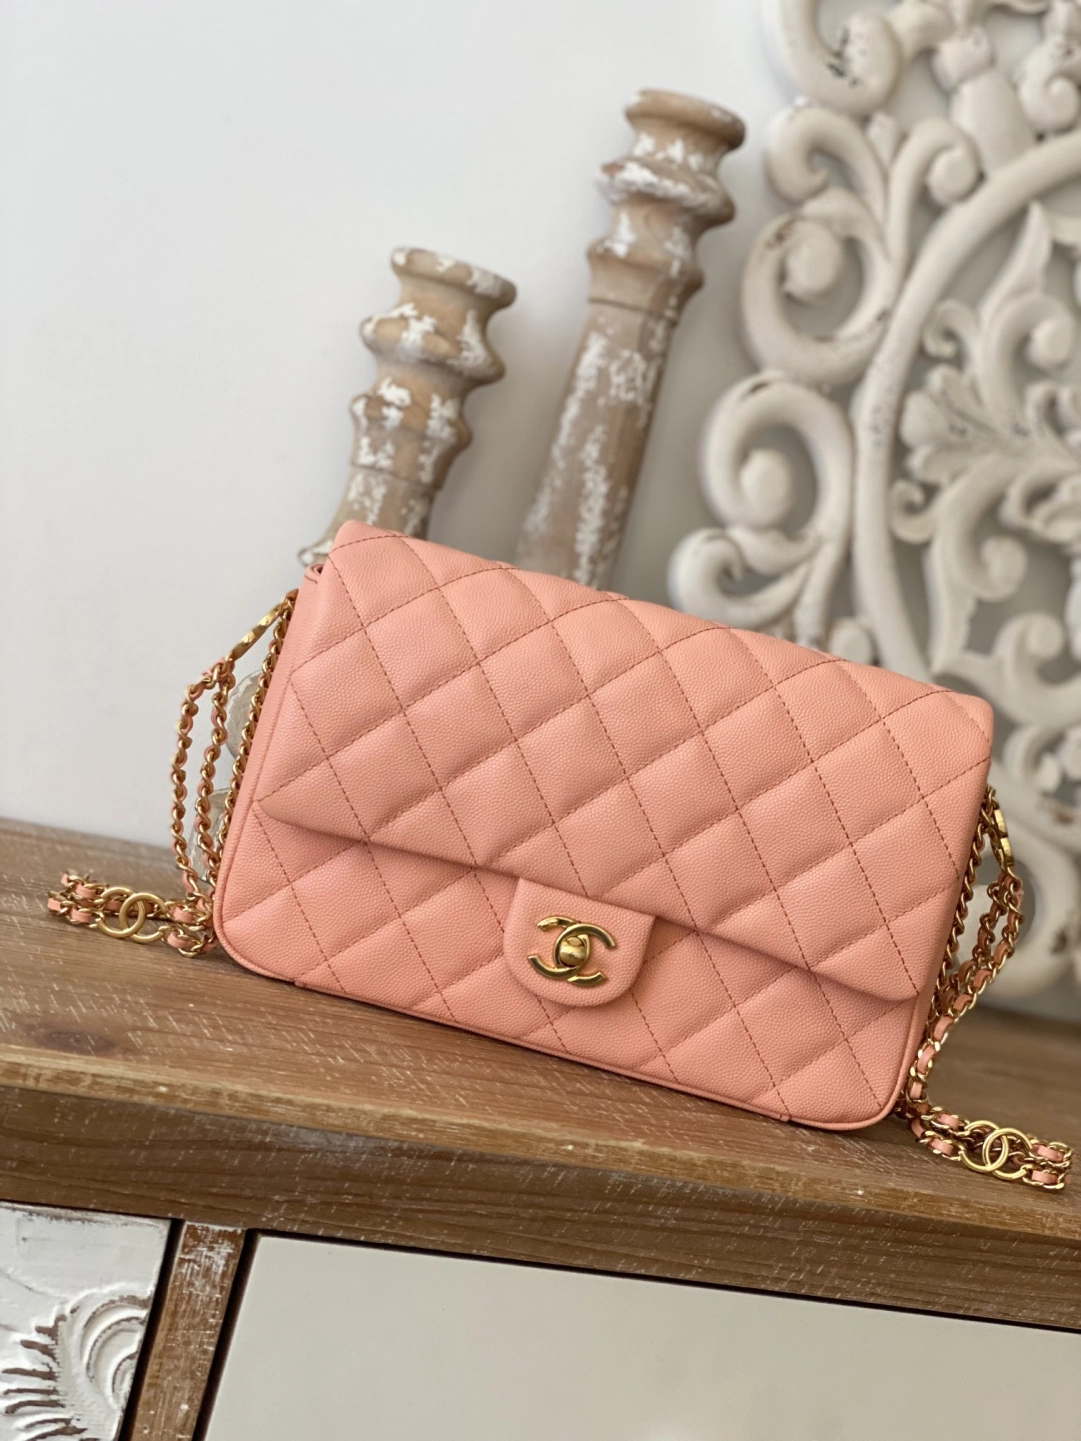 Replica Chanel 1 As3777 Pink